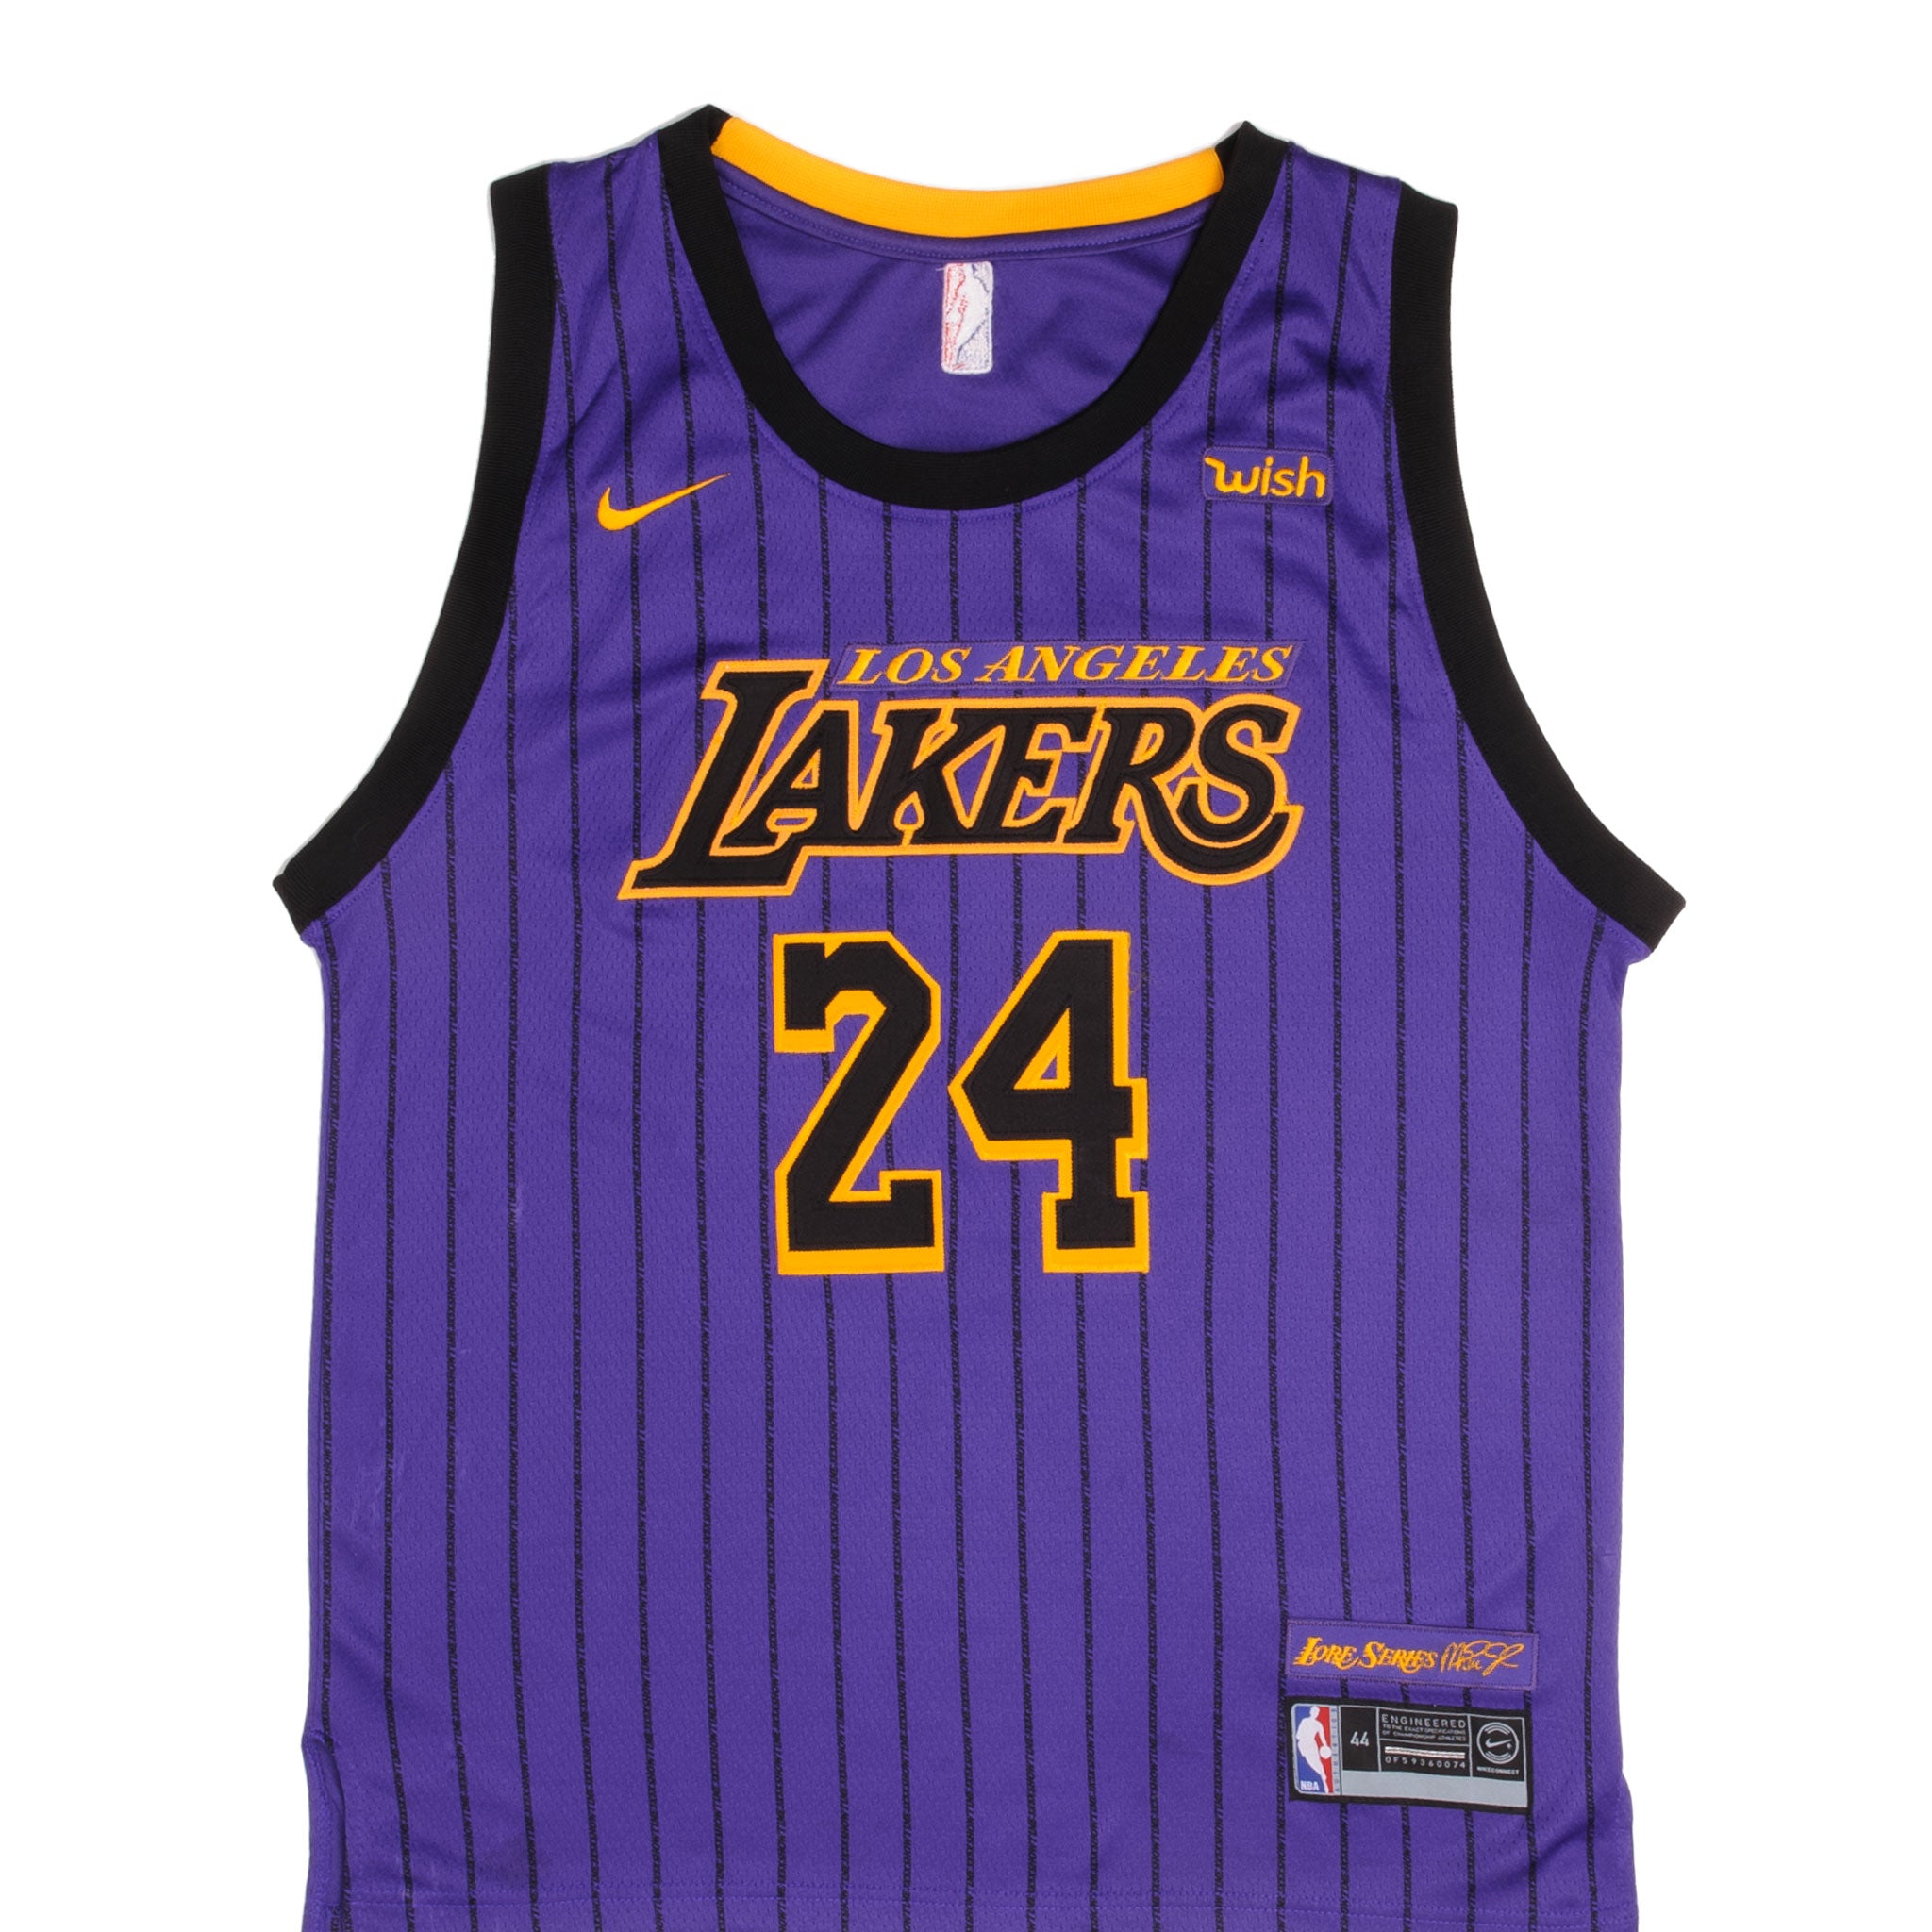 The Los Angeles Lakers Outfit